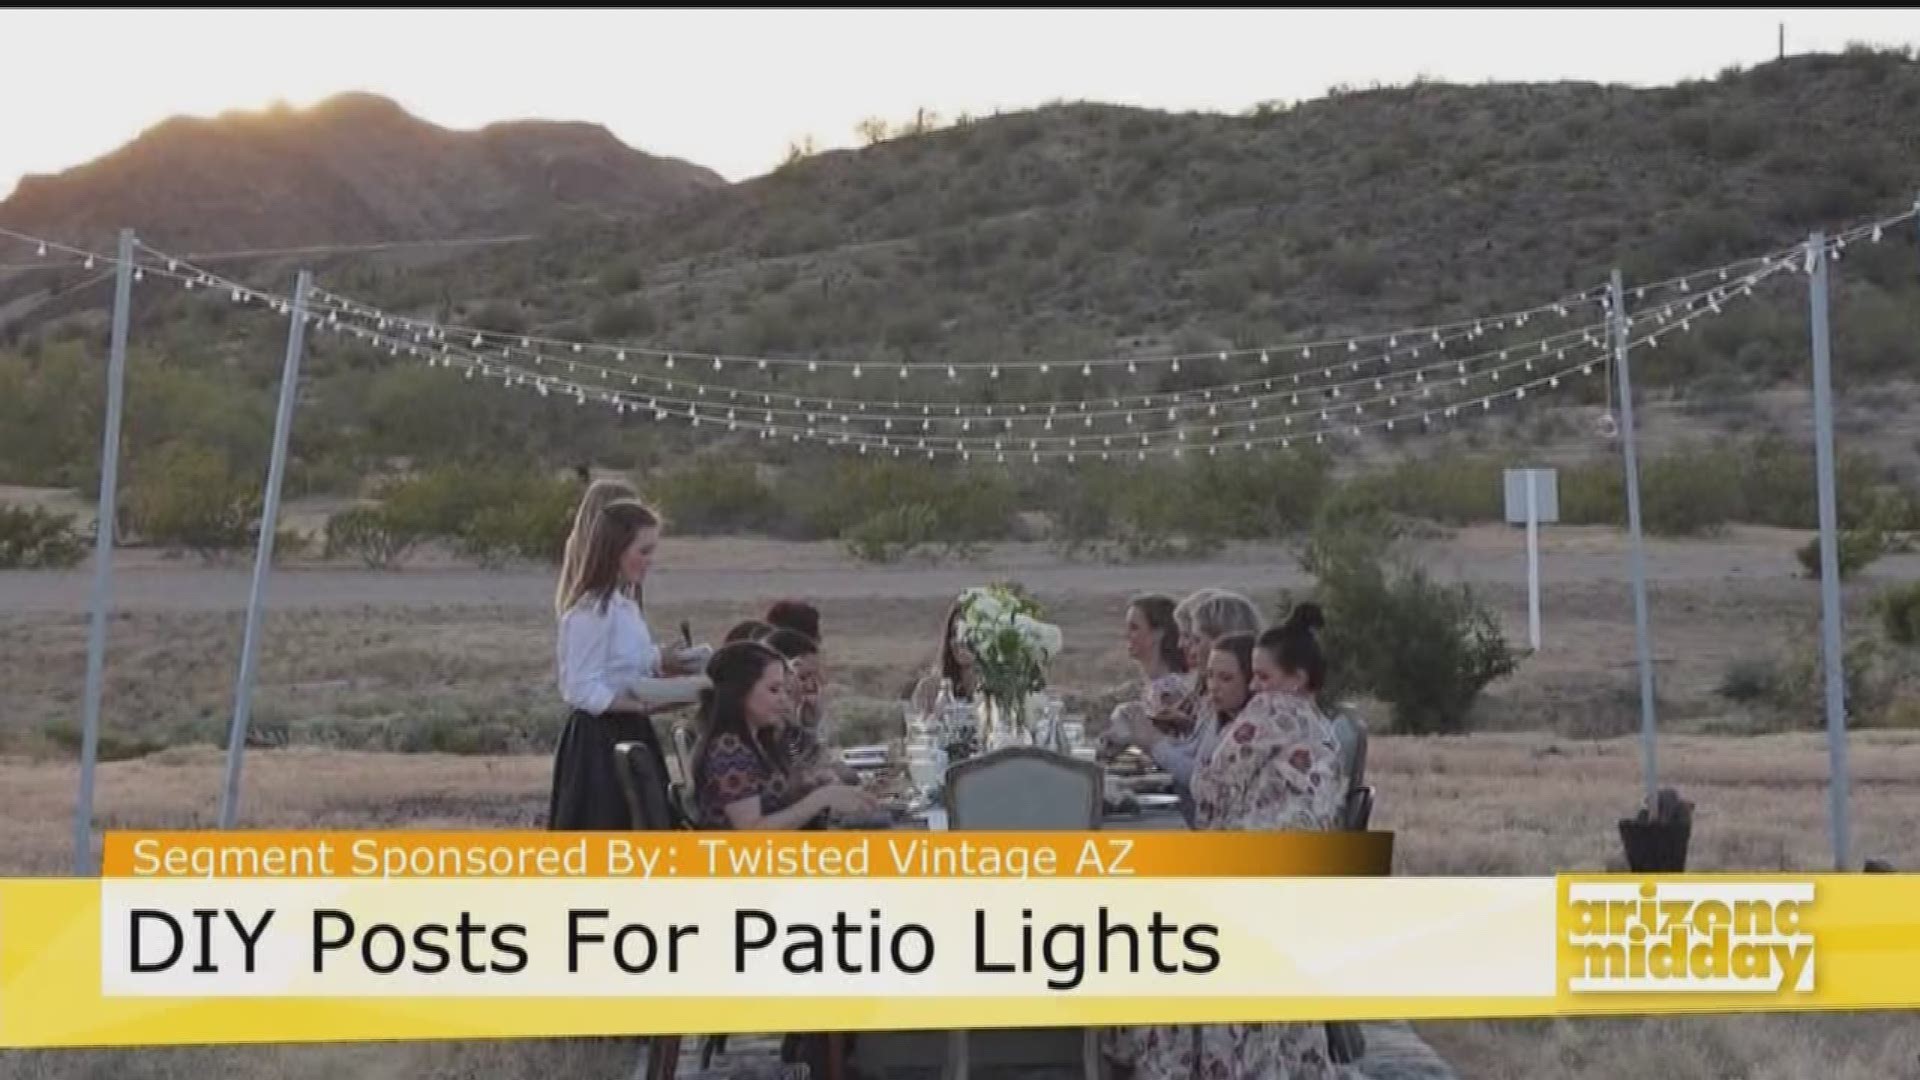 Jessica from Twisted Vintage is showing us how to light up your backyard with these DIY lights.